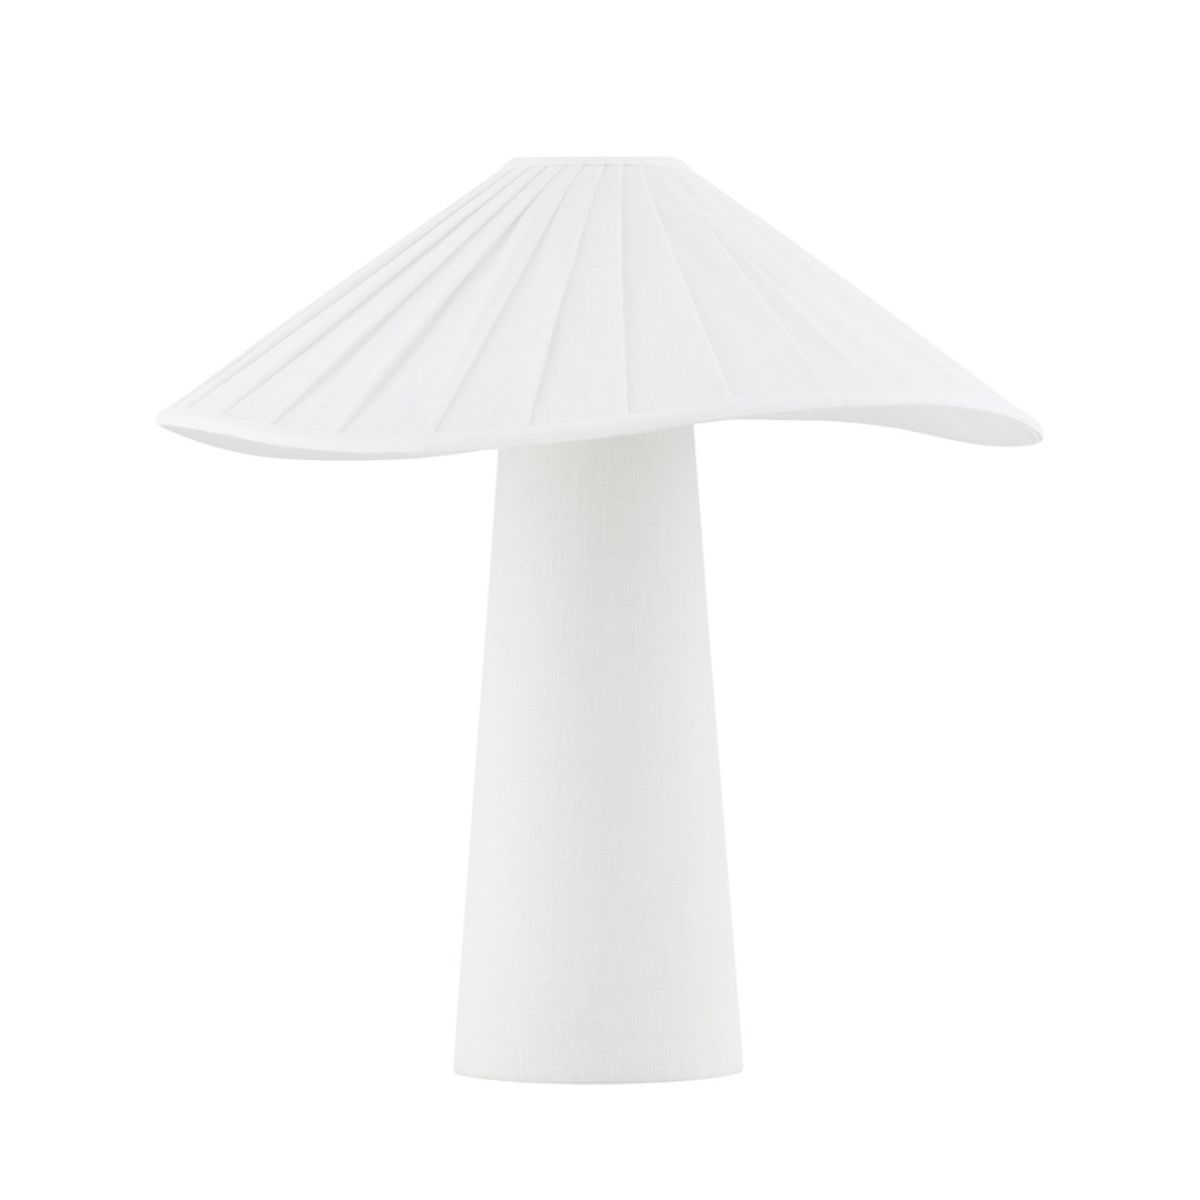 Chanterelle Table Lamp Natural Linen with Patina Brass Accents